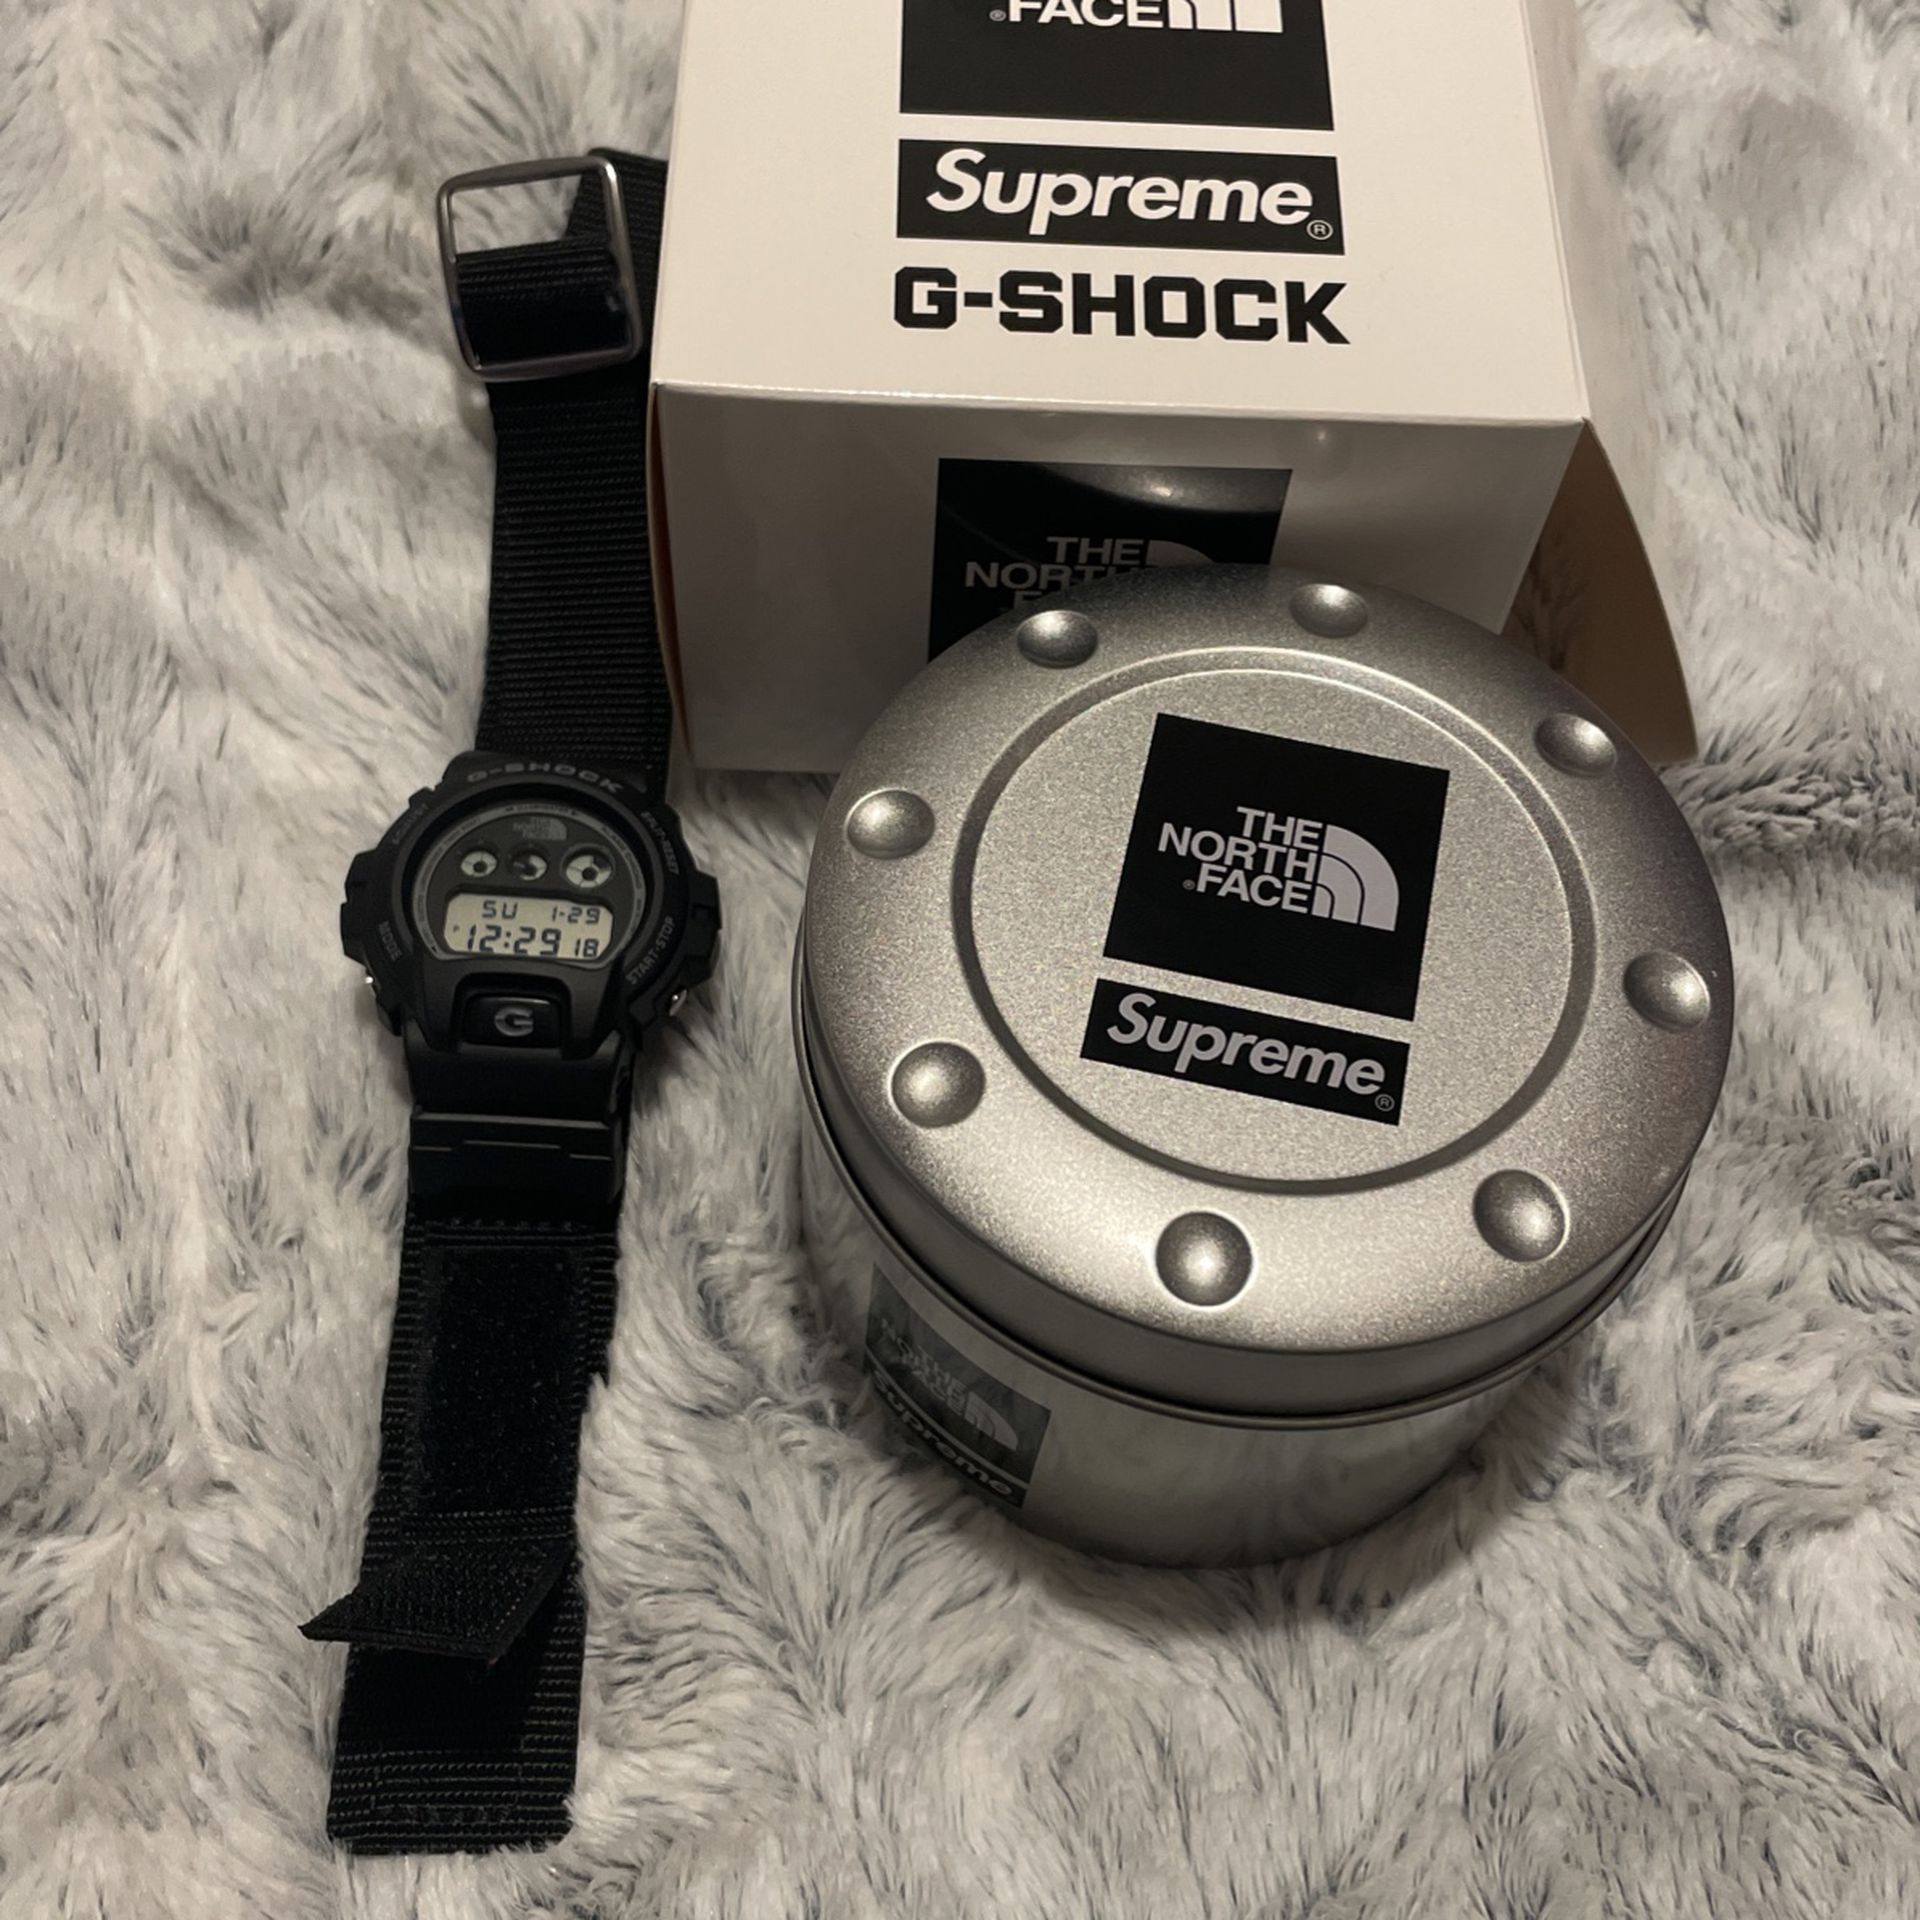 G SHOCK SUPREME WATCH NORTH FACE for Sale in Brooklyn, NY - OfferUp